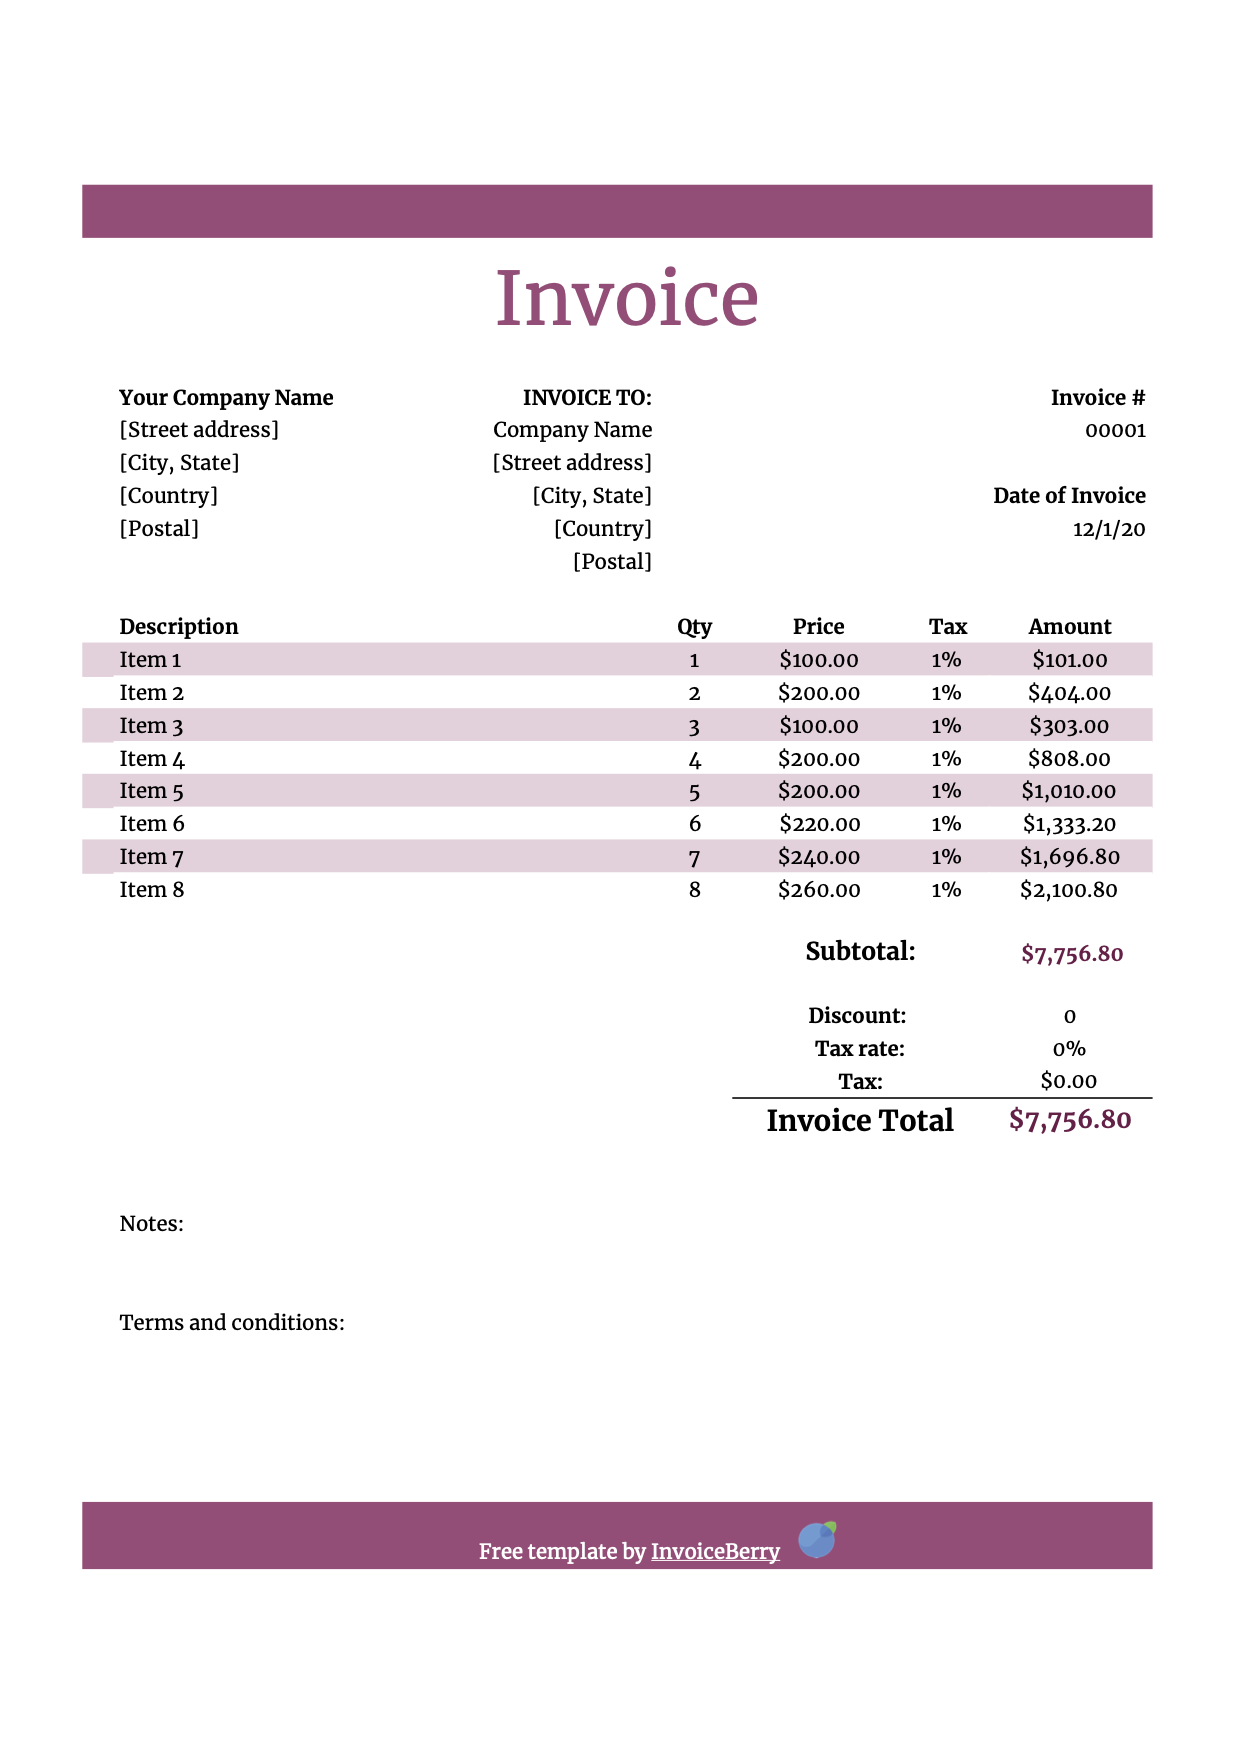 Free Numbers invoice templates - get invoice templates for Mac For Invoice Template Ipad